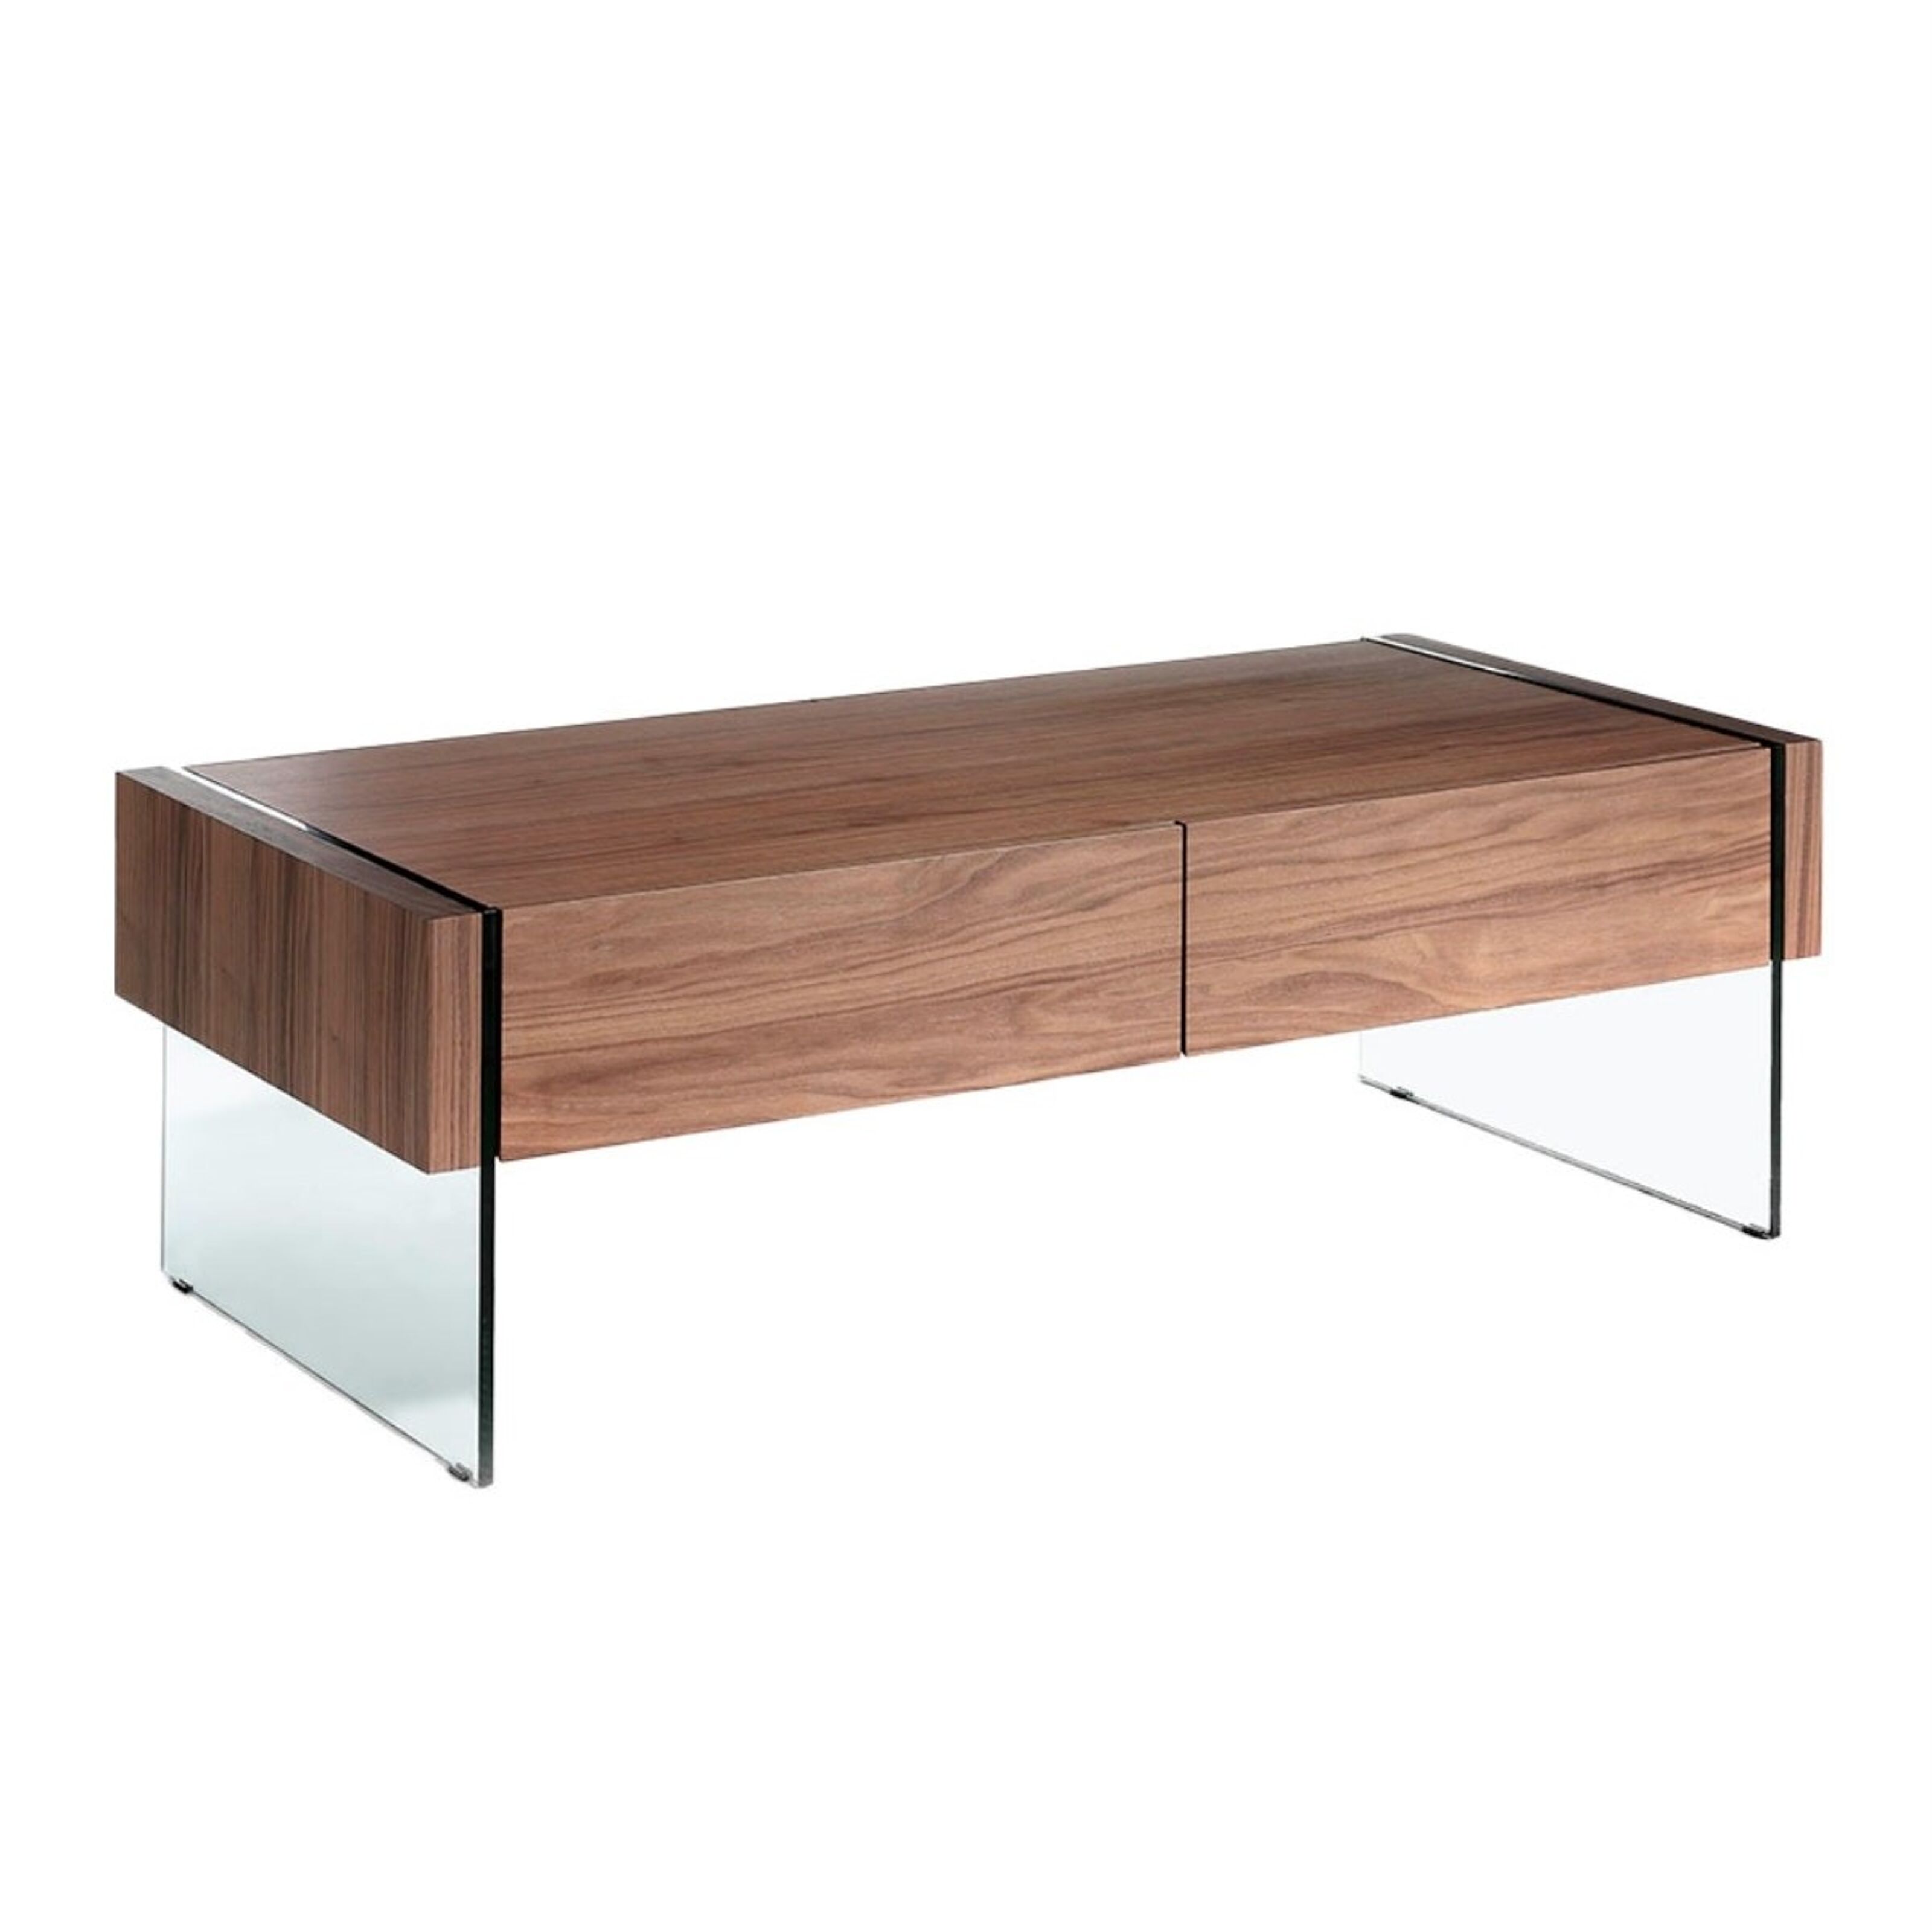 Walnut 2050 and drawers, glass model wholesale sides Buy veneered center with table wood tempered